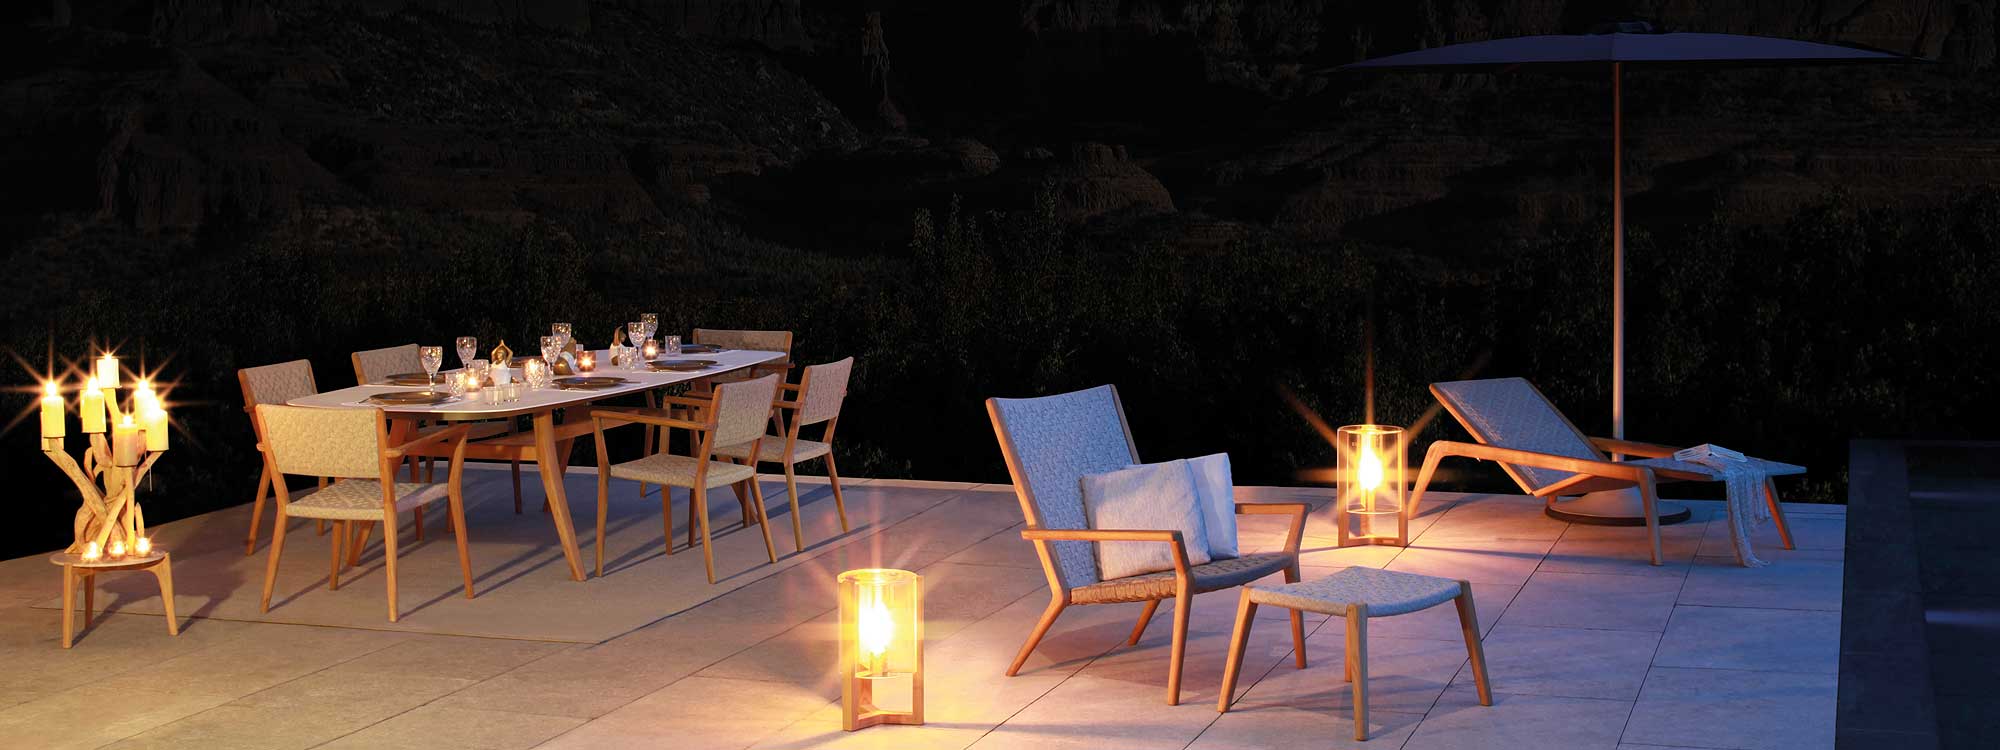 Night Time Shot Of Vita LUXURY Sun Lounger Designed By Kris Van Puyvelde. Vita Is DESIGNER Teak Sunbed & ADJUSTABLE Sun Lounger With Wheels In PREMIUM QUALITY Exterior Furniture Materials. Vita Is Made By ROYAL BOTANIA Teak Garden FURNITURE Company & Vita TEAK Garden Chair Designed By Kris Van Puyvelde, Is A MODERN Outdoor DINING Chair & Teak CARVER Chair In HIGH QUALITY Exterior Furniture Materials, And Is Made By ROYAL BOTANIA Teak Garden FURNITURE Company & VITA Modern Garden Lounge Chair Designed By Kris Van Puyvelde. LUXURY Outdoor EASY CHAIR & FOOT STOOL Made In High Quality Garden Furniture Materials Of A-Grade Teak & Olefin Synthetic Fibre. ROYAL BOTANIA Contemporary TEAK Garden FURNITURE. Royal Botania Garden Furniture Is Suitable For Residential & Hospitality Projects. Luxury Outdoor Carpets - All-Weather, Different Sizes & Colours - High Quality Outdoor Rug Materials By Royal Botania Modern Garden Furniture .